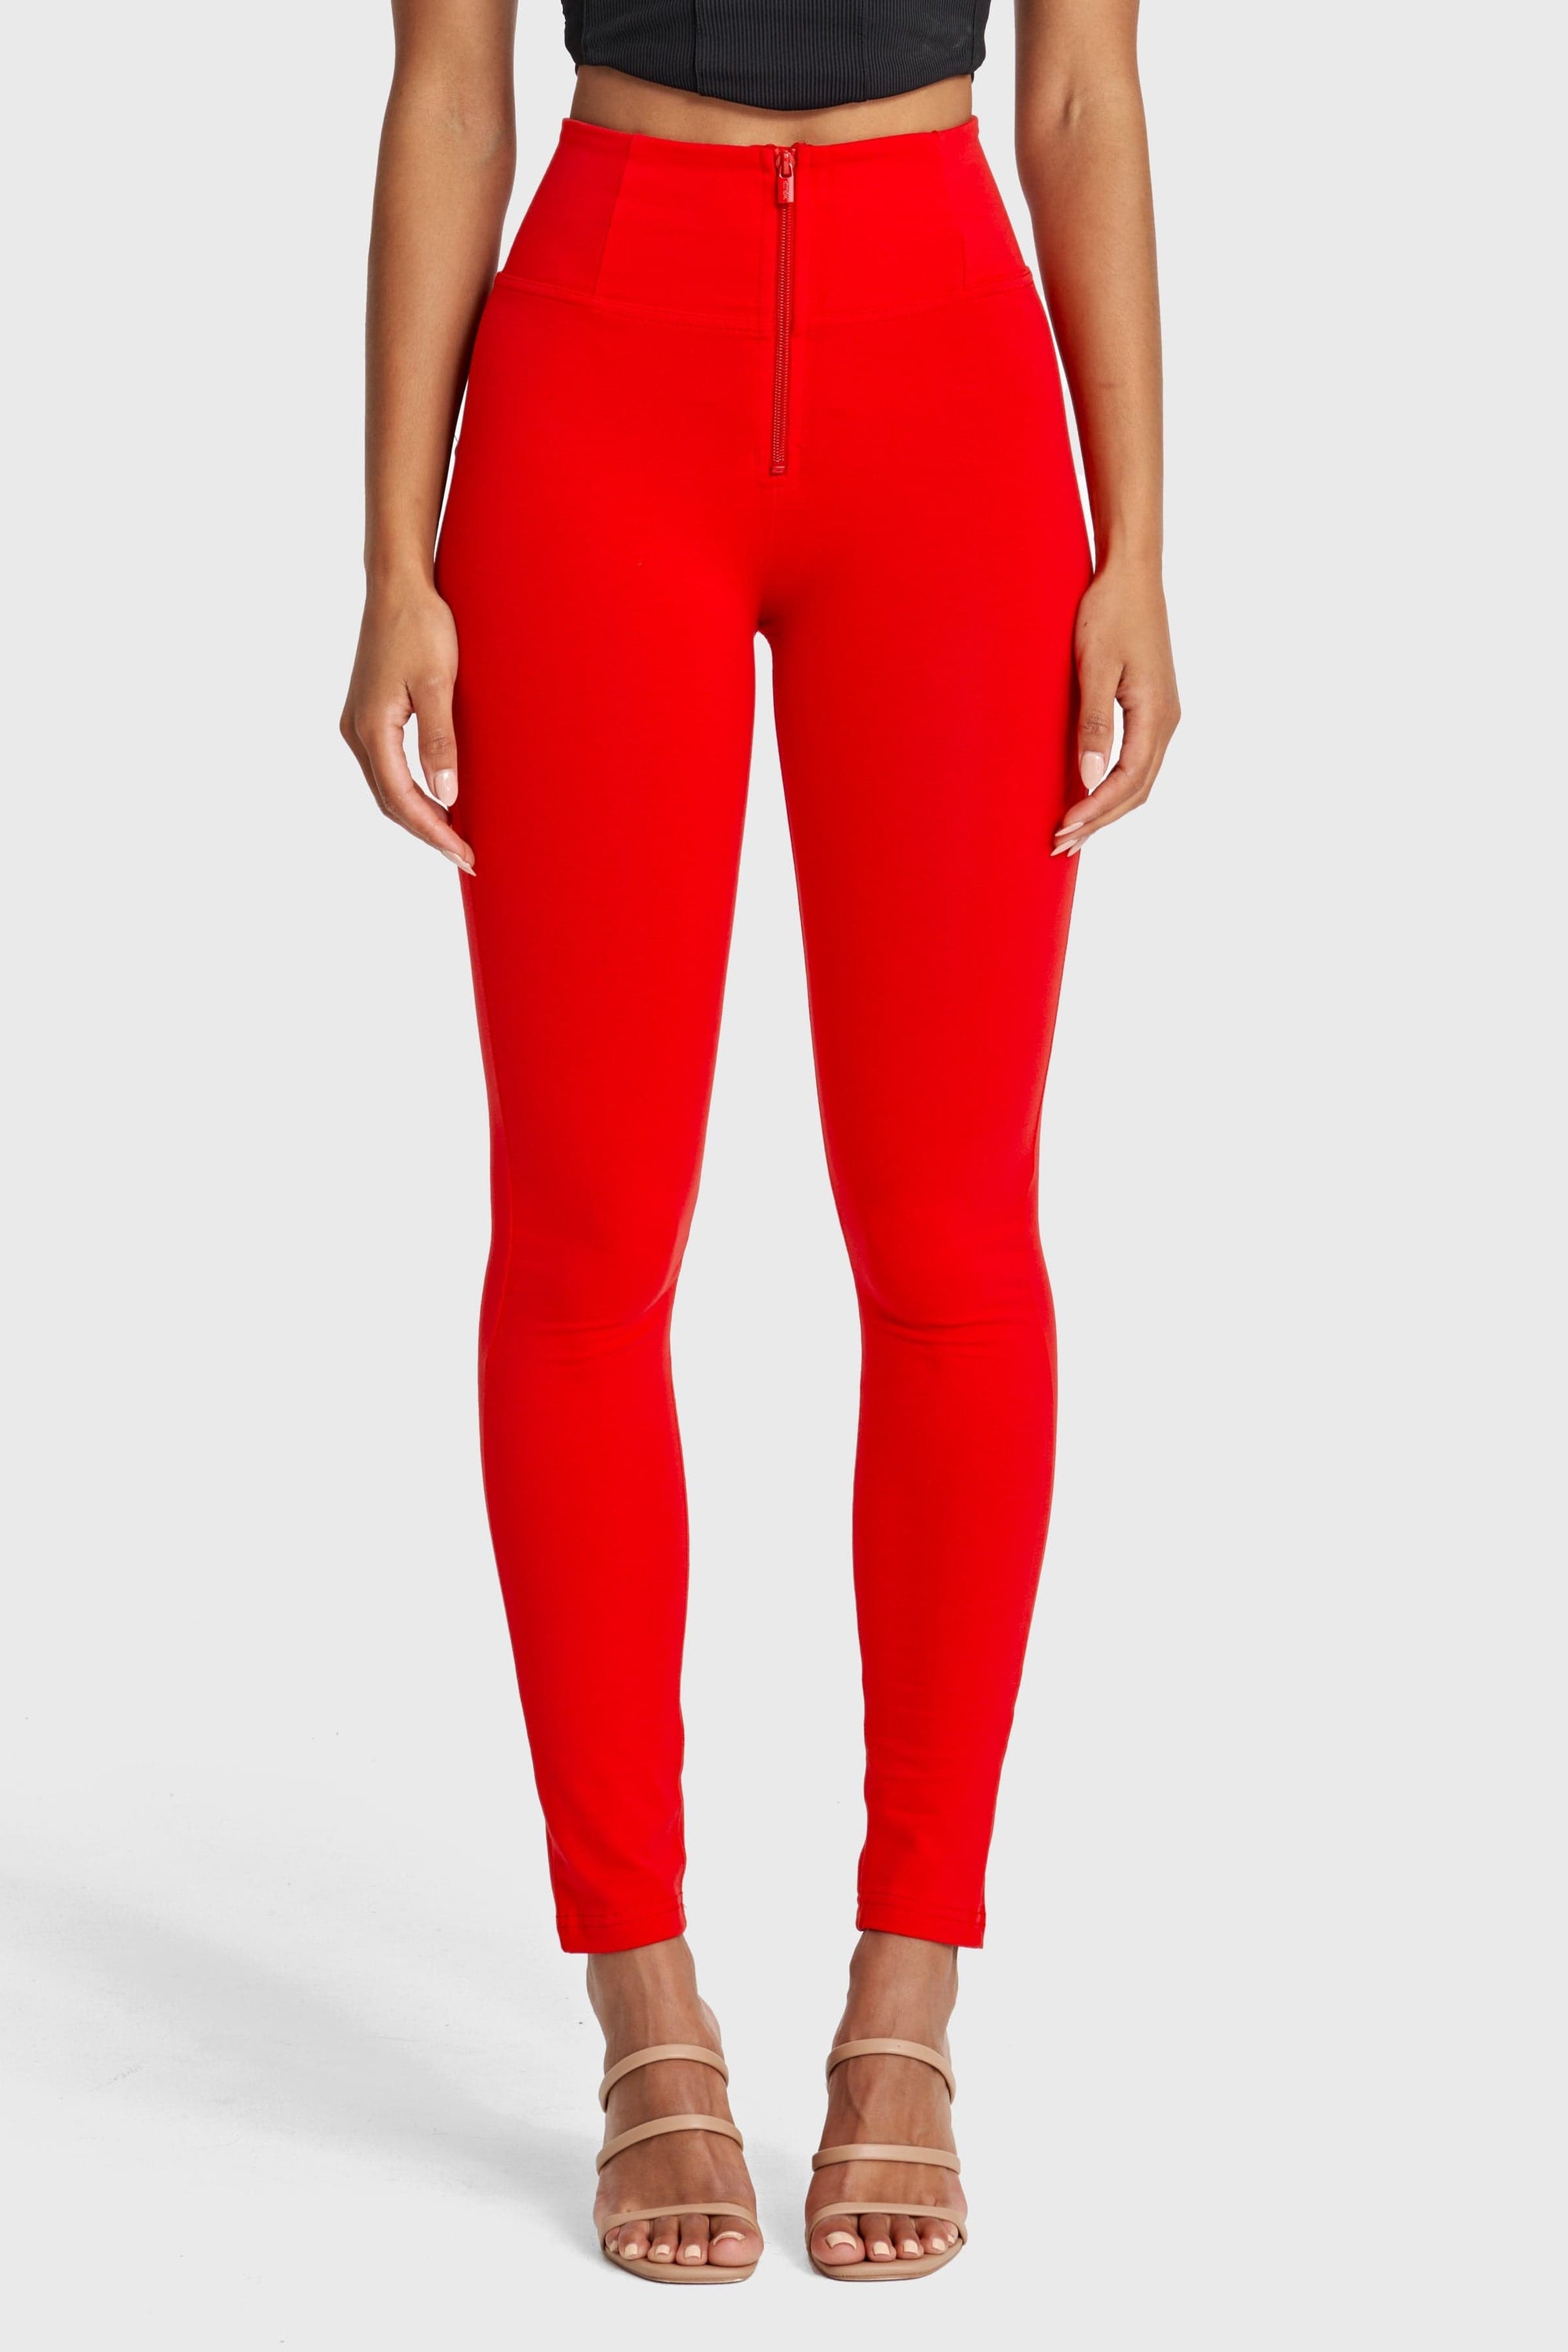 WR.UP® Fashion - High Waisted - Full Length - Red 7